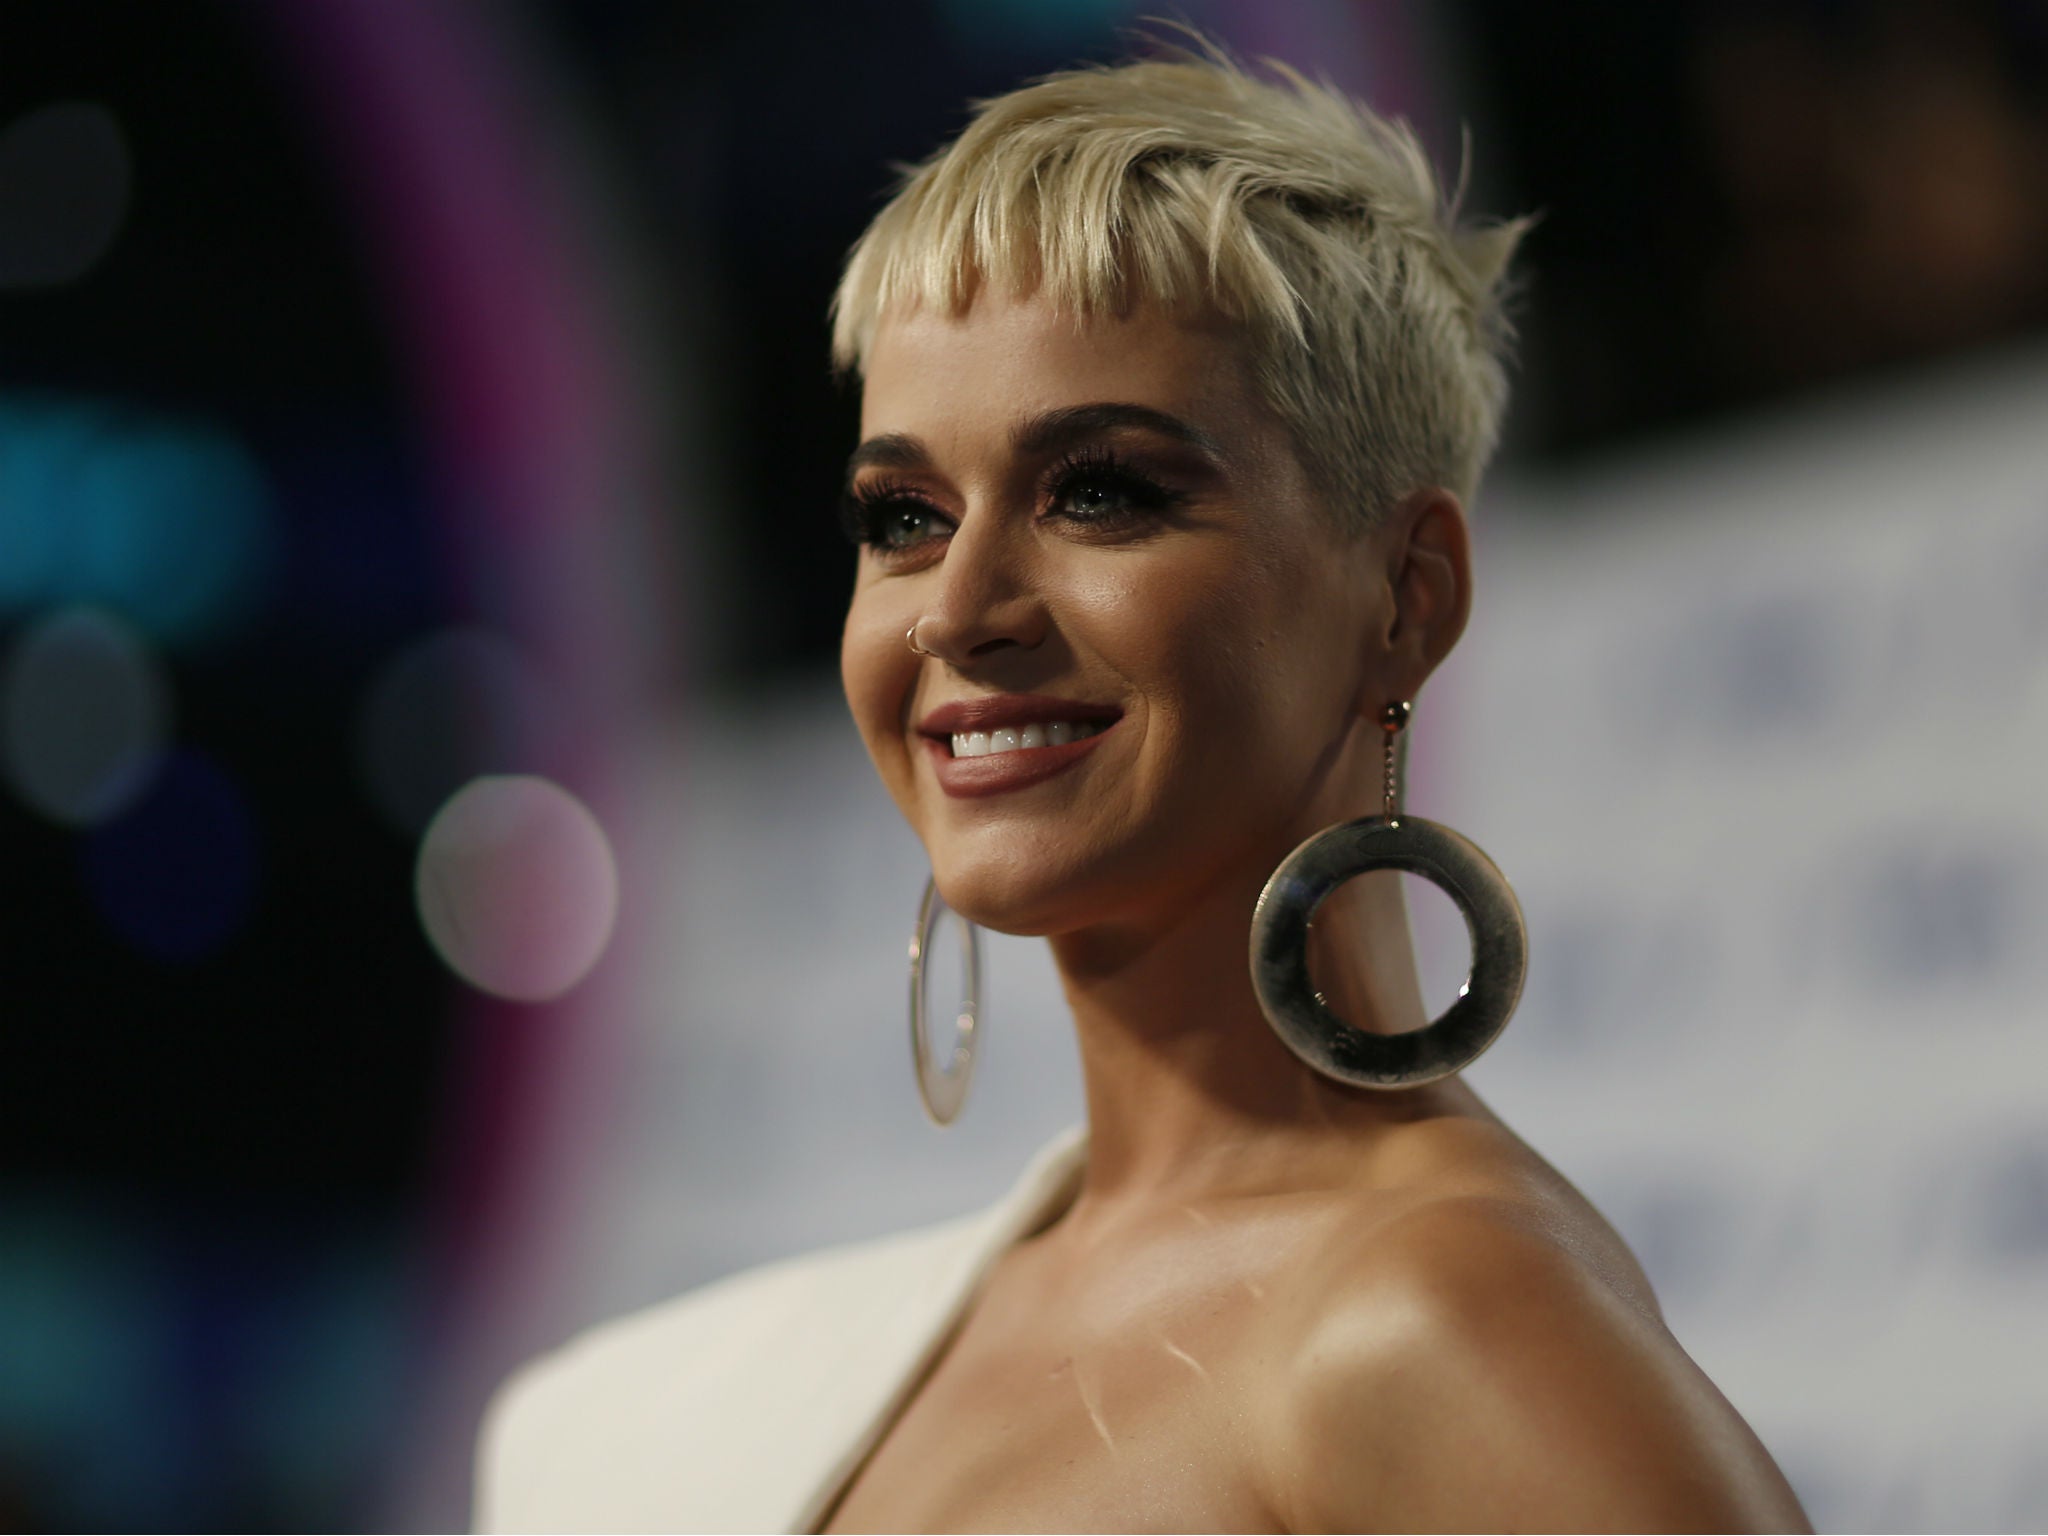 Katy Perry at the 2017 MTV Video Music Awards in Inglewood, California on August 27, 2017